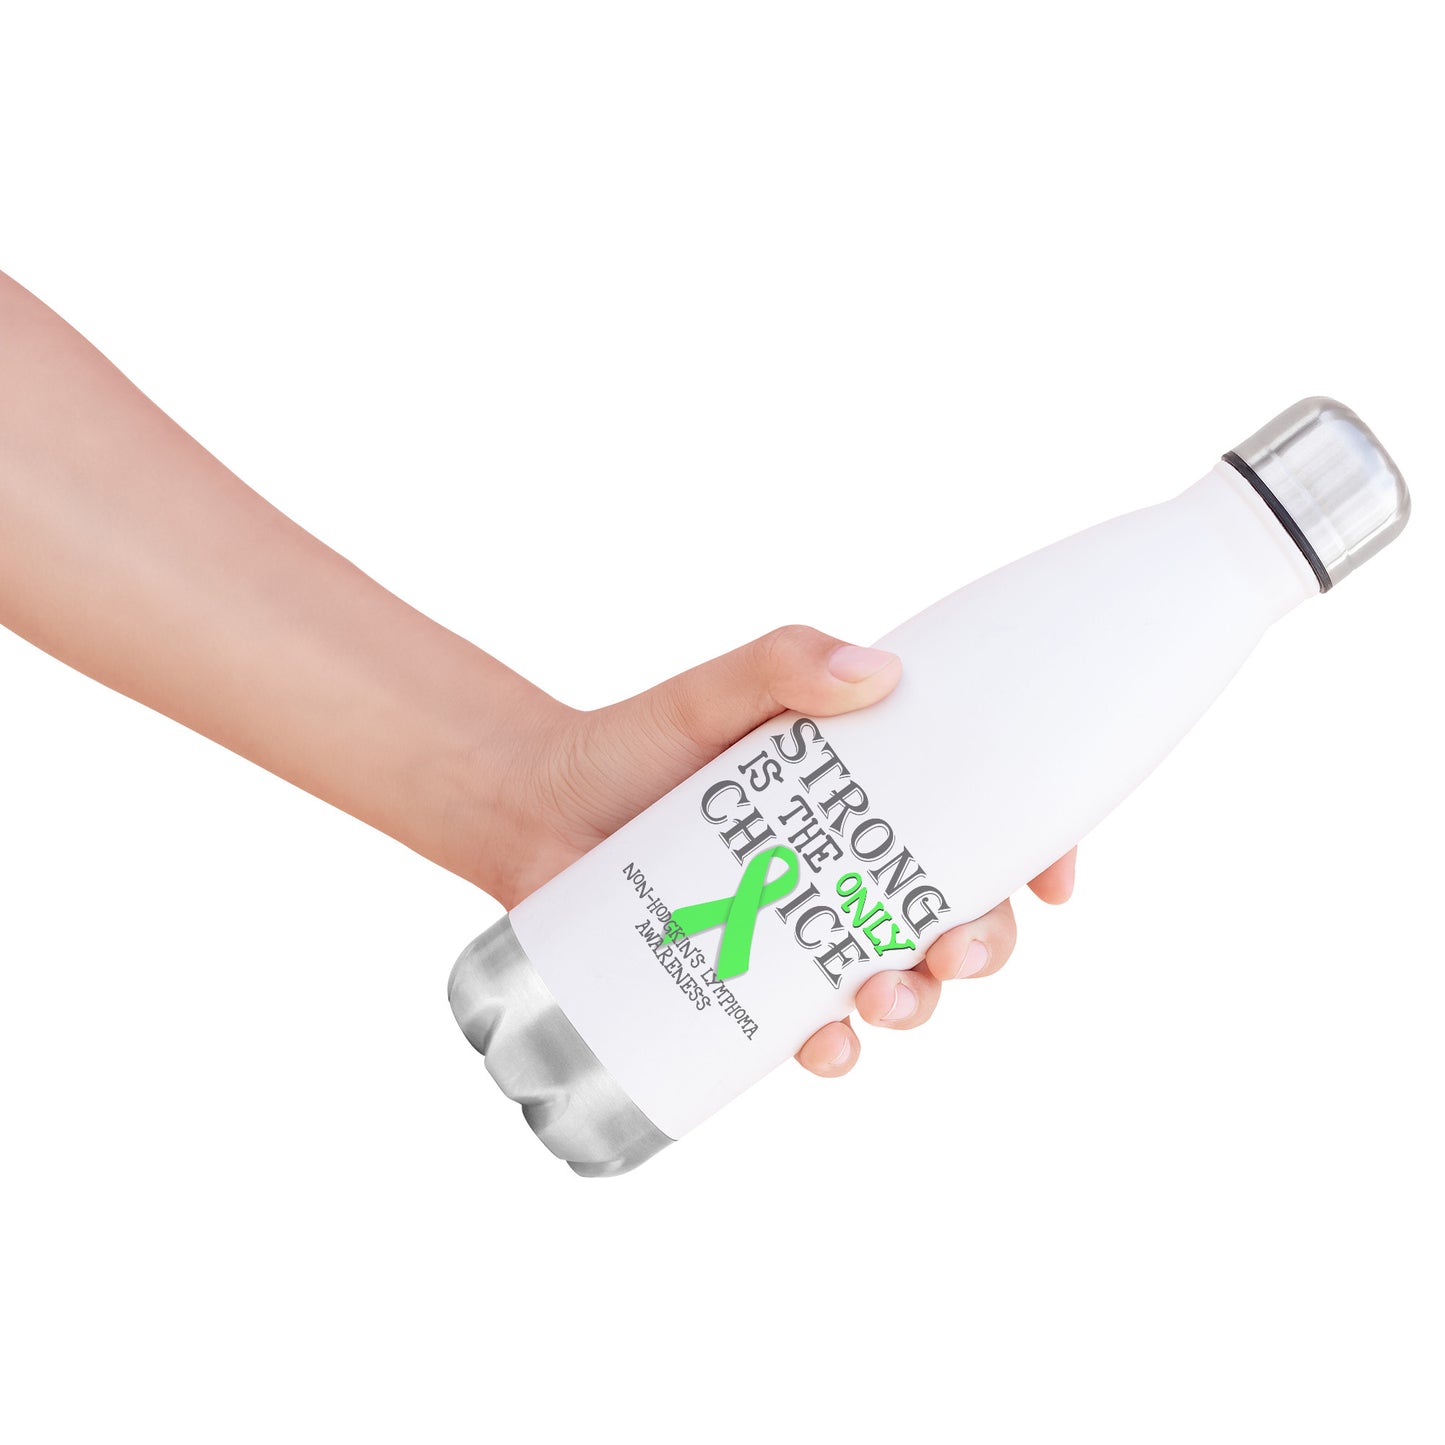 Strong is the Only Choice -Non-Hodgkin's Lymphoma Awareness 20oz Insulated Water Bottle